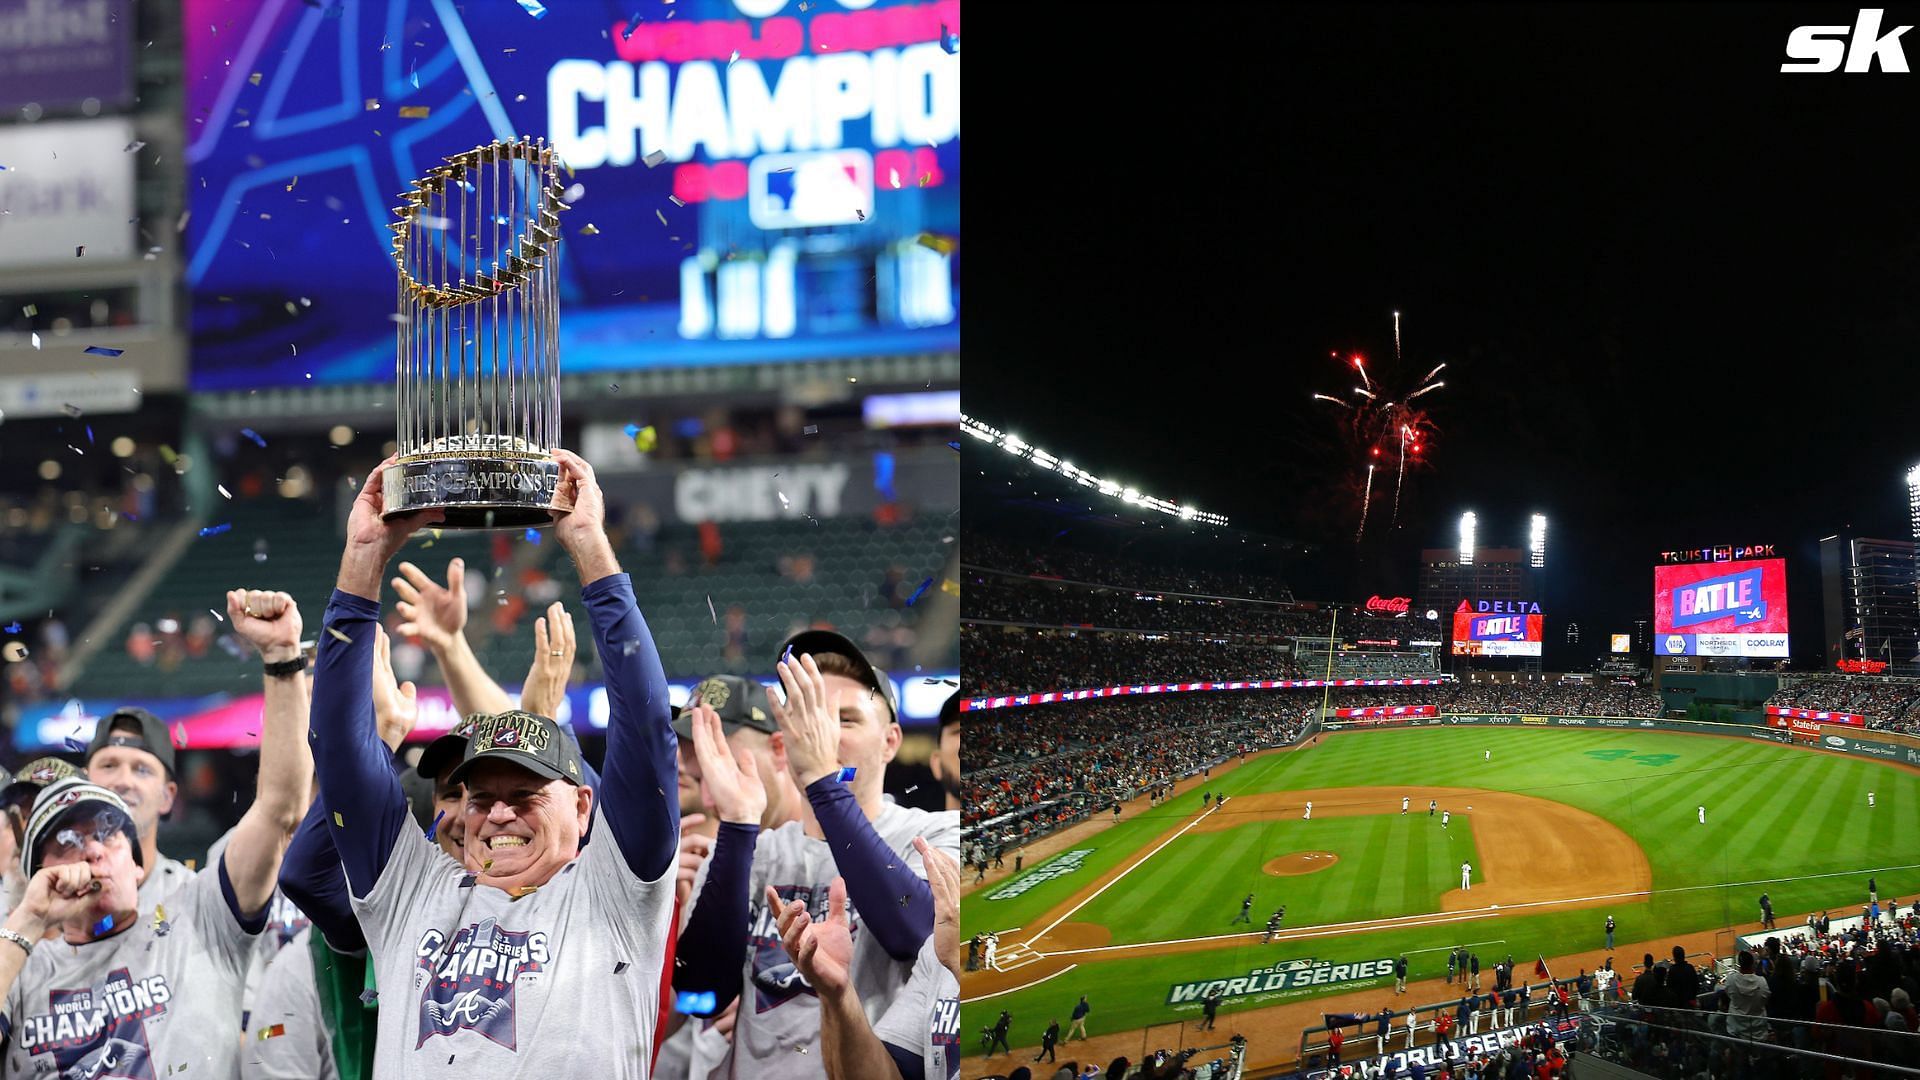 Atlanta Brave have won the most division titles in MLB history